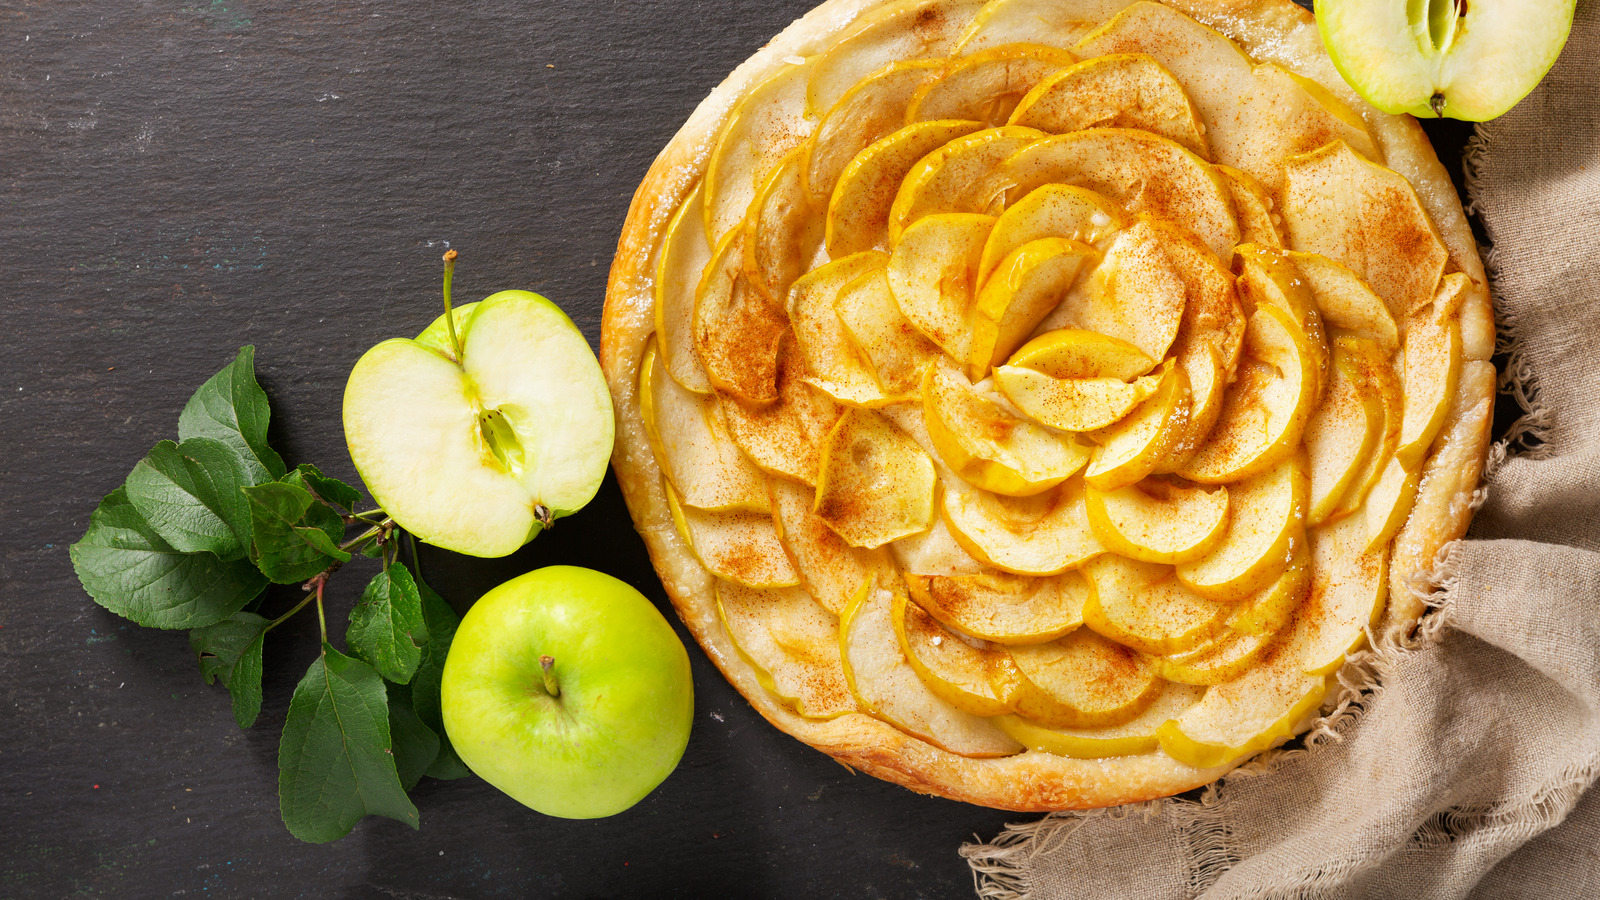 The Absolute Best Apples For Baking